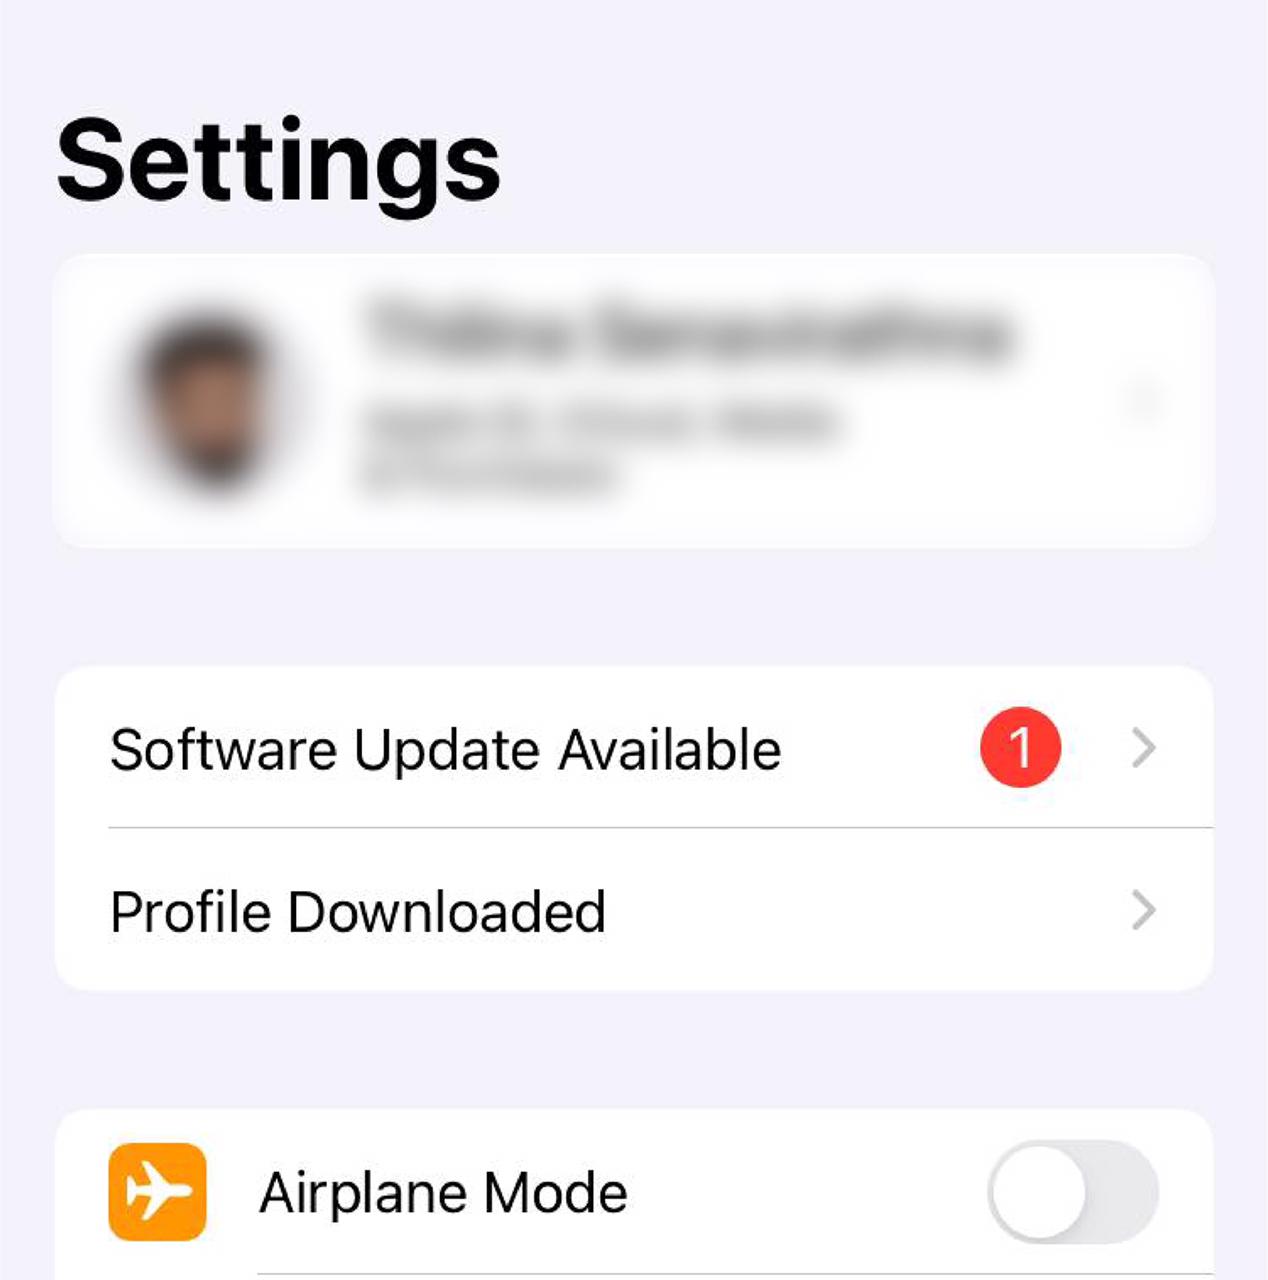 go to settings and tap profile downloaded